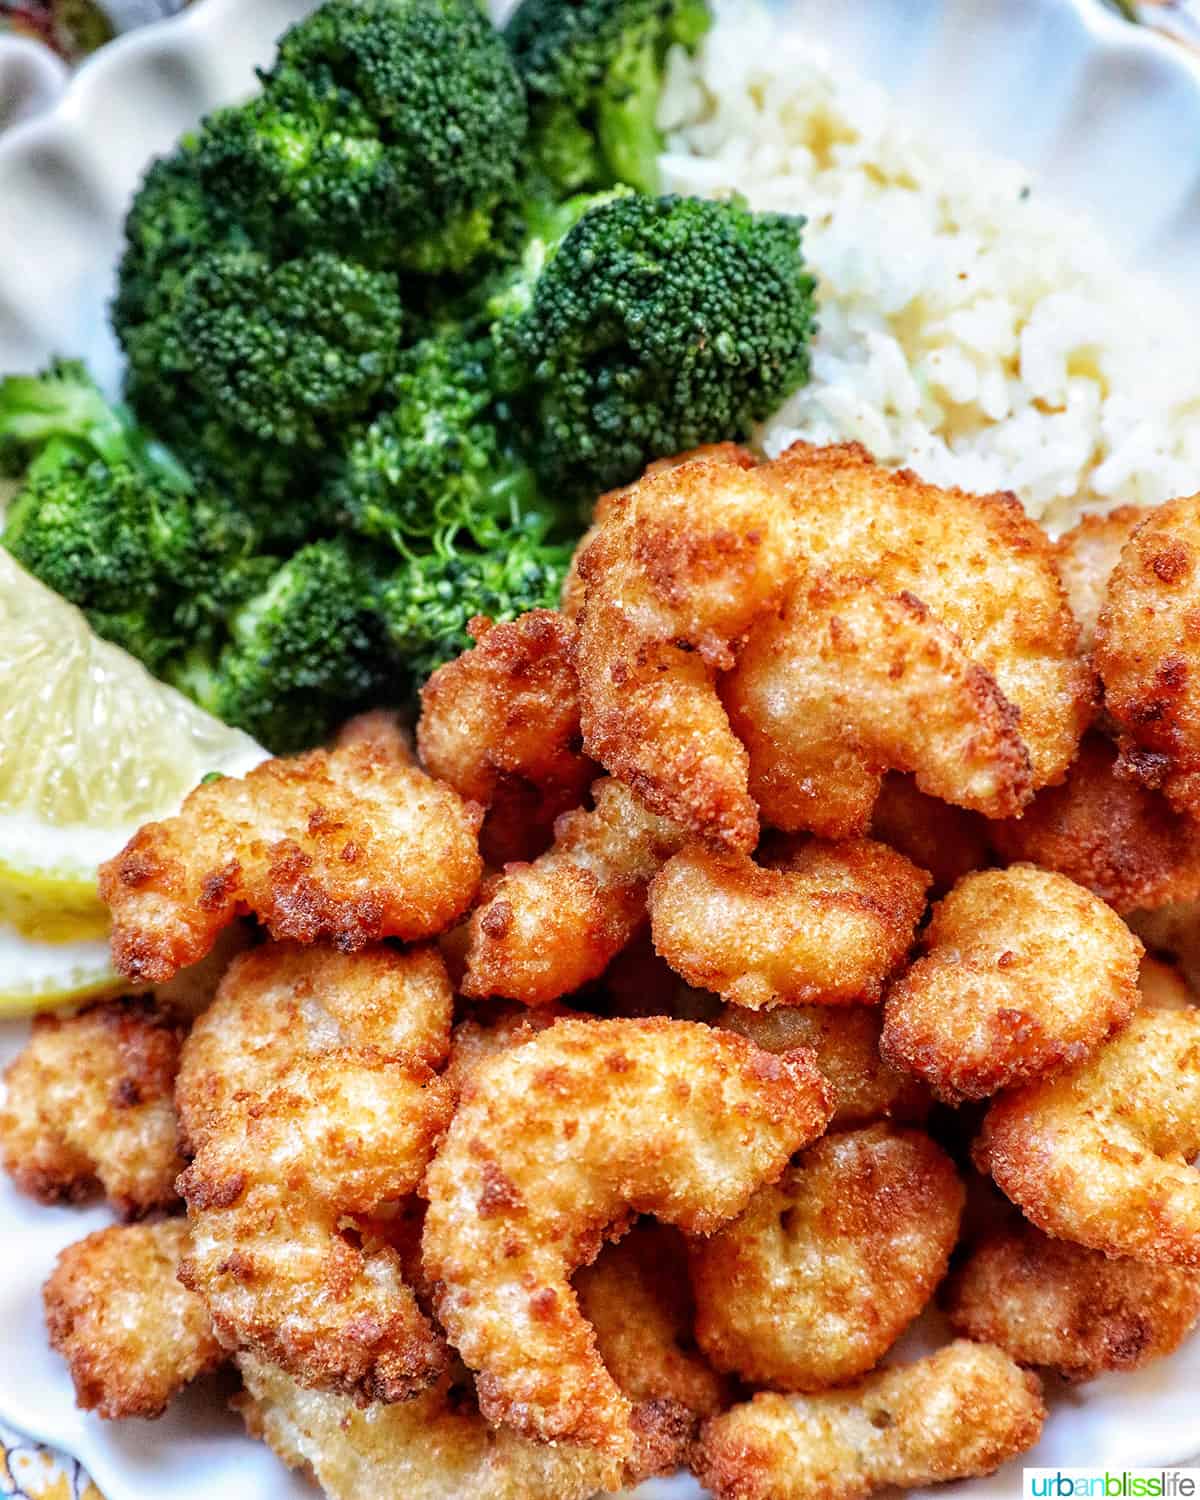 airfryer popcorn shrimp on a plate with broccoli, lemon wedges.